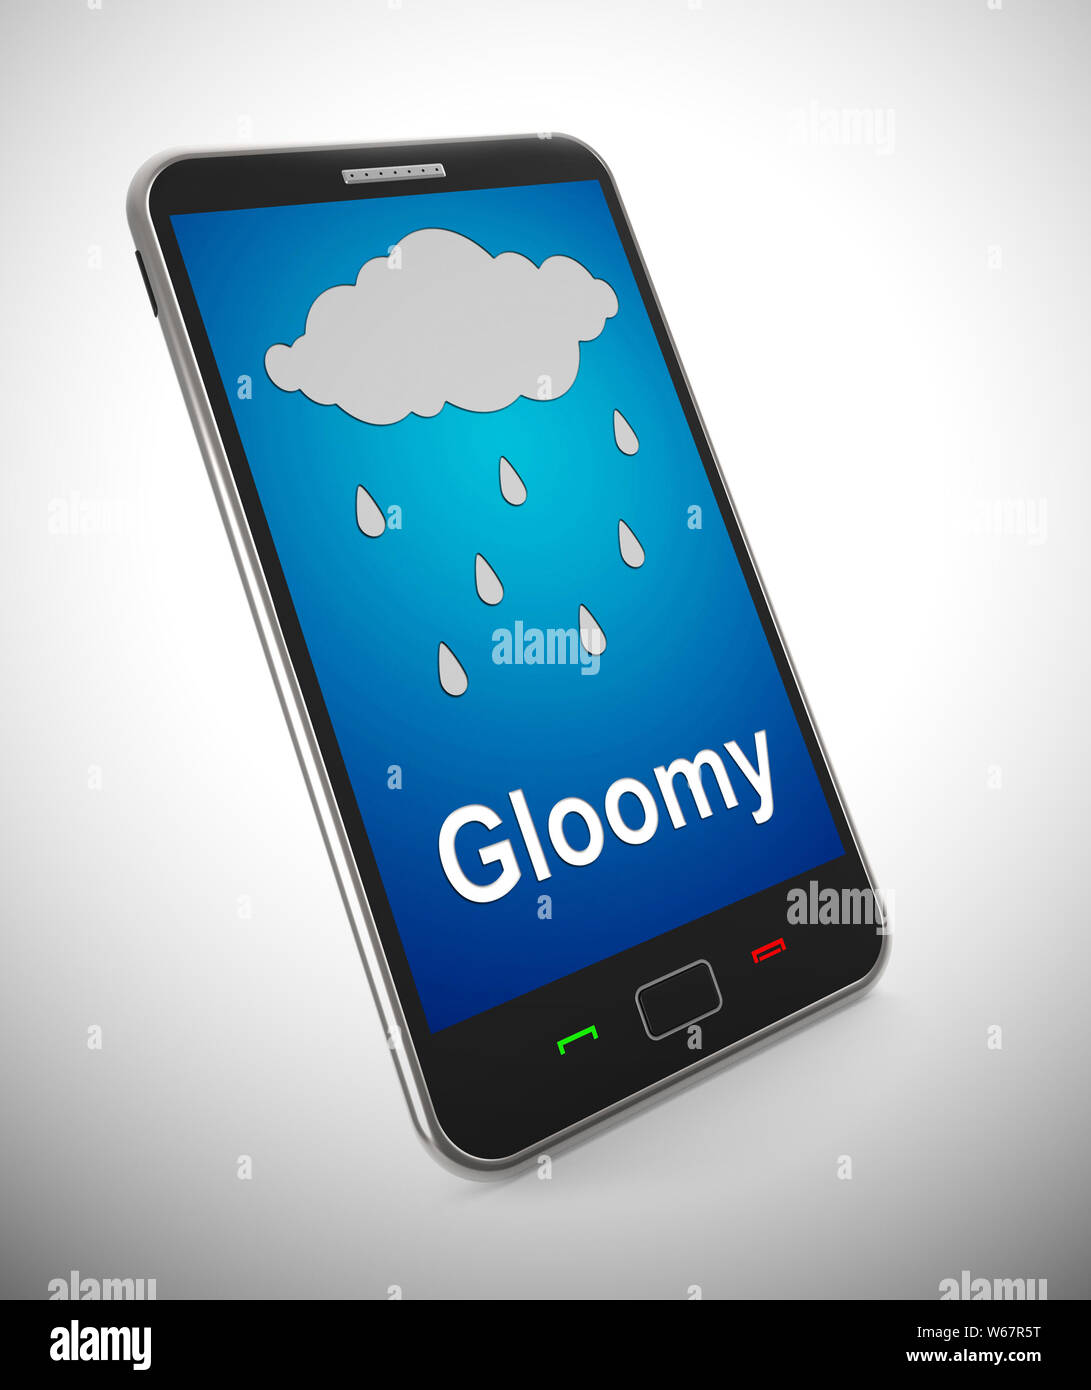 Gloomy weather smartphone means dreary and glum rainy downpours. Check weather online during season - 3d illustration Stock Photo